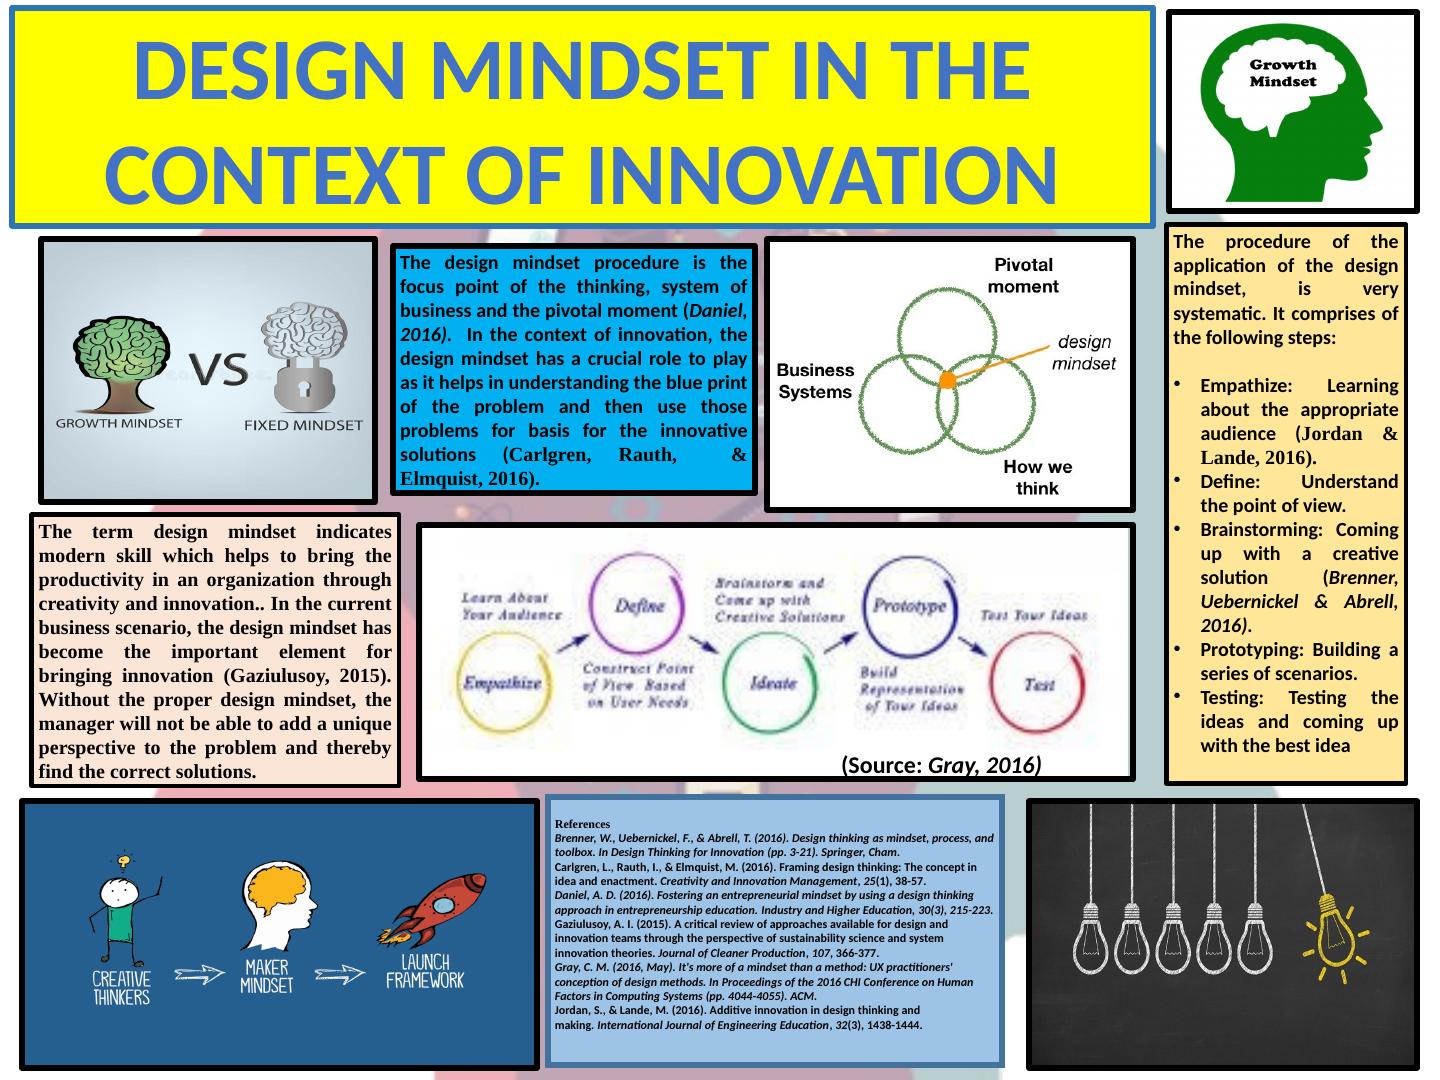 Design Mindset in the Context of Innovation_1